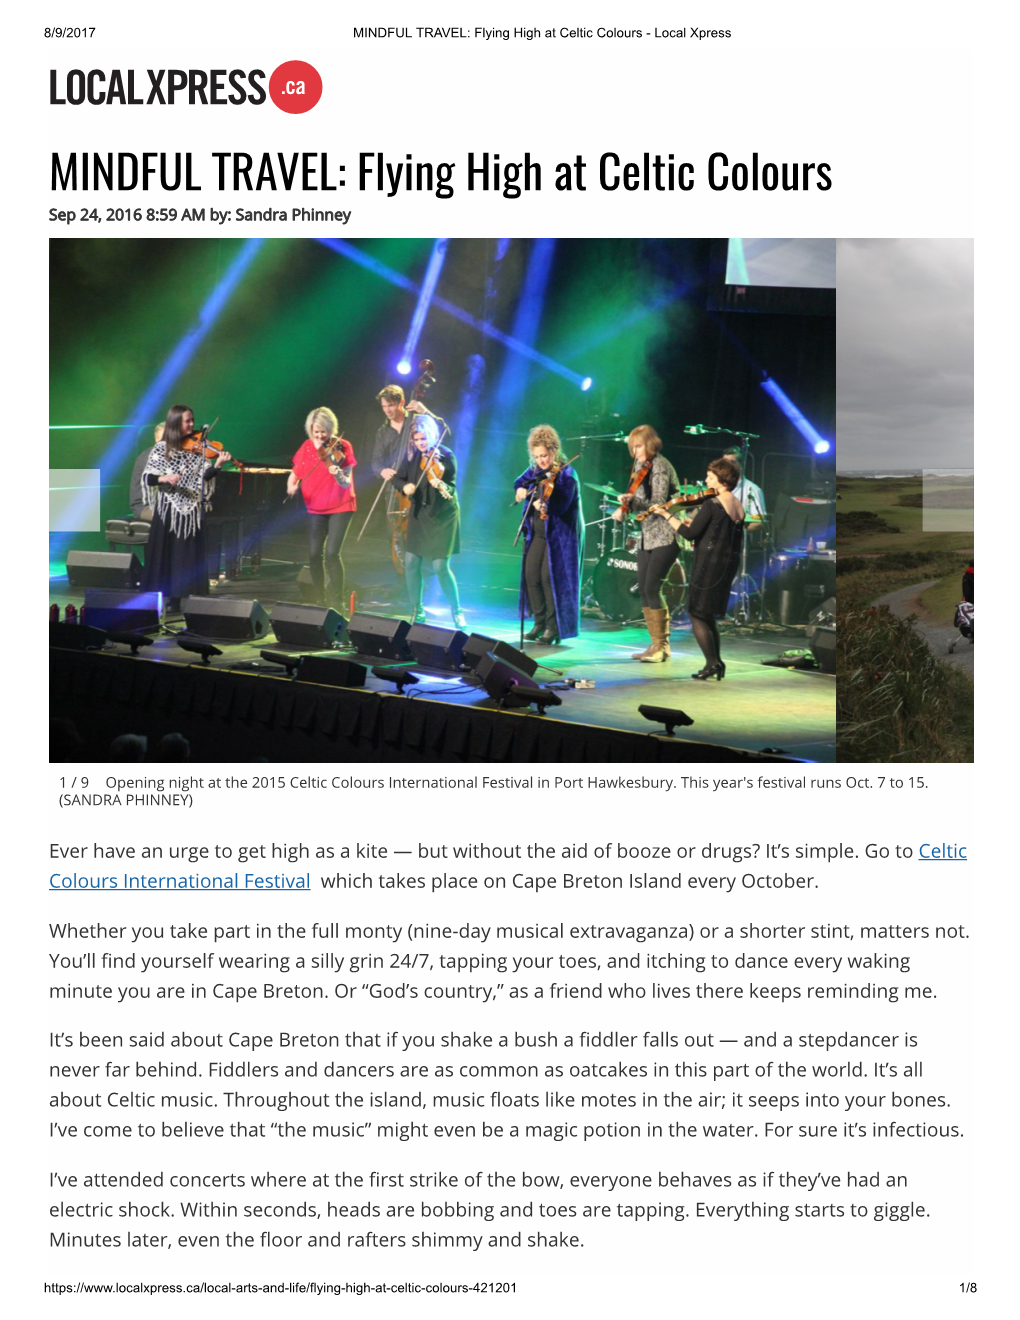 Flying High at Celtic Colours - Local Xpress